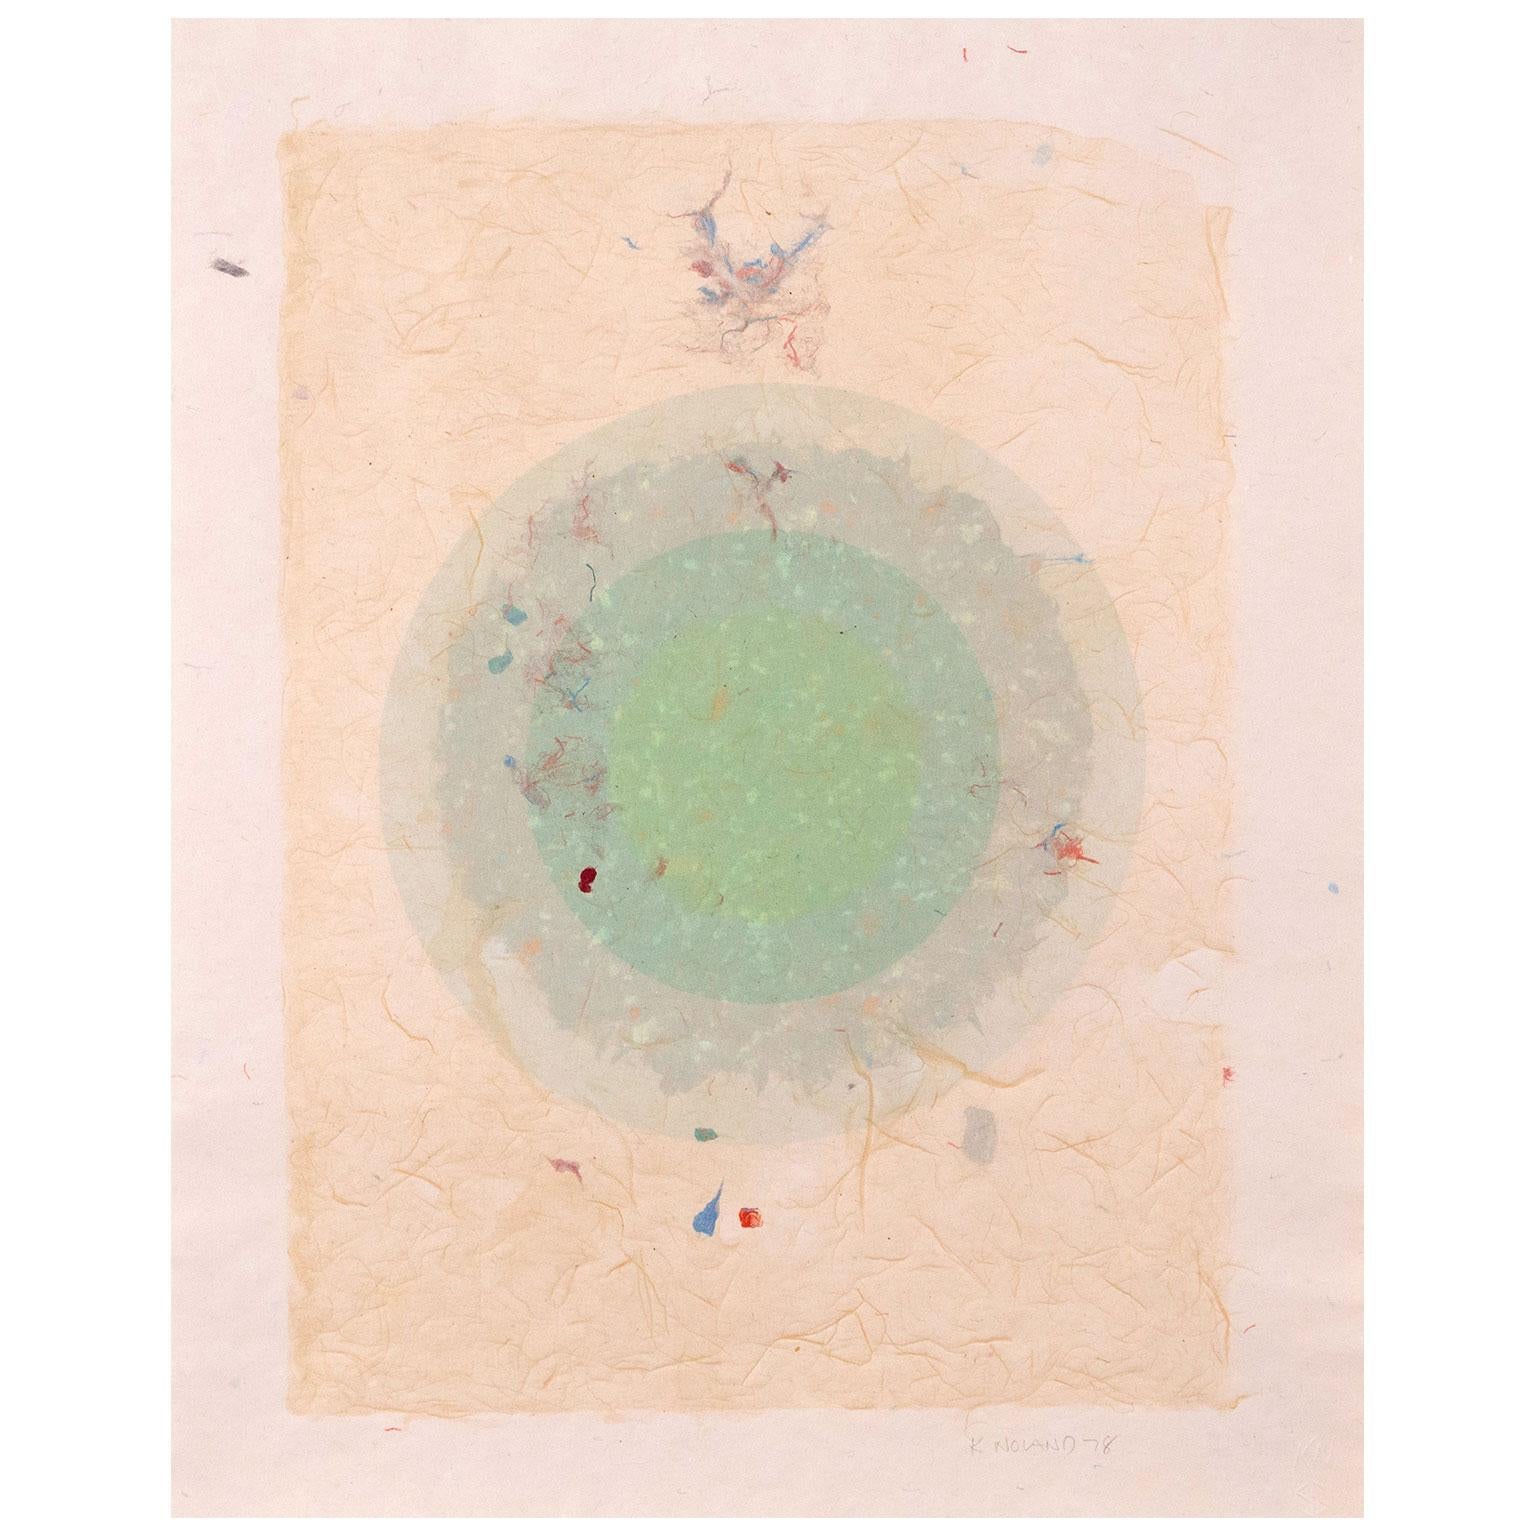 Kenneth Noland (1924 – 2010) is one of the most important contributors to the evolution of American abstraction, specifically as a leading figure in the Color-Field movement. 

Unlike many of his contemporaries, Noland started exploring printmaking